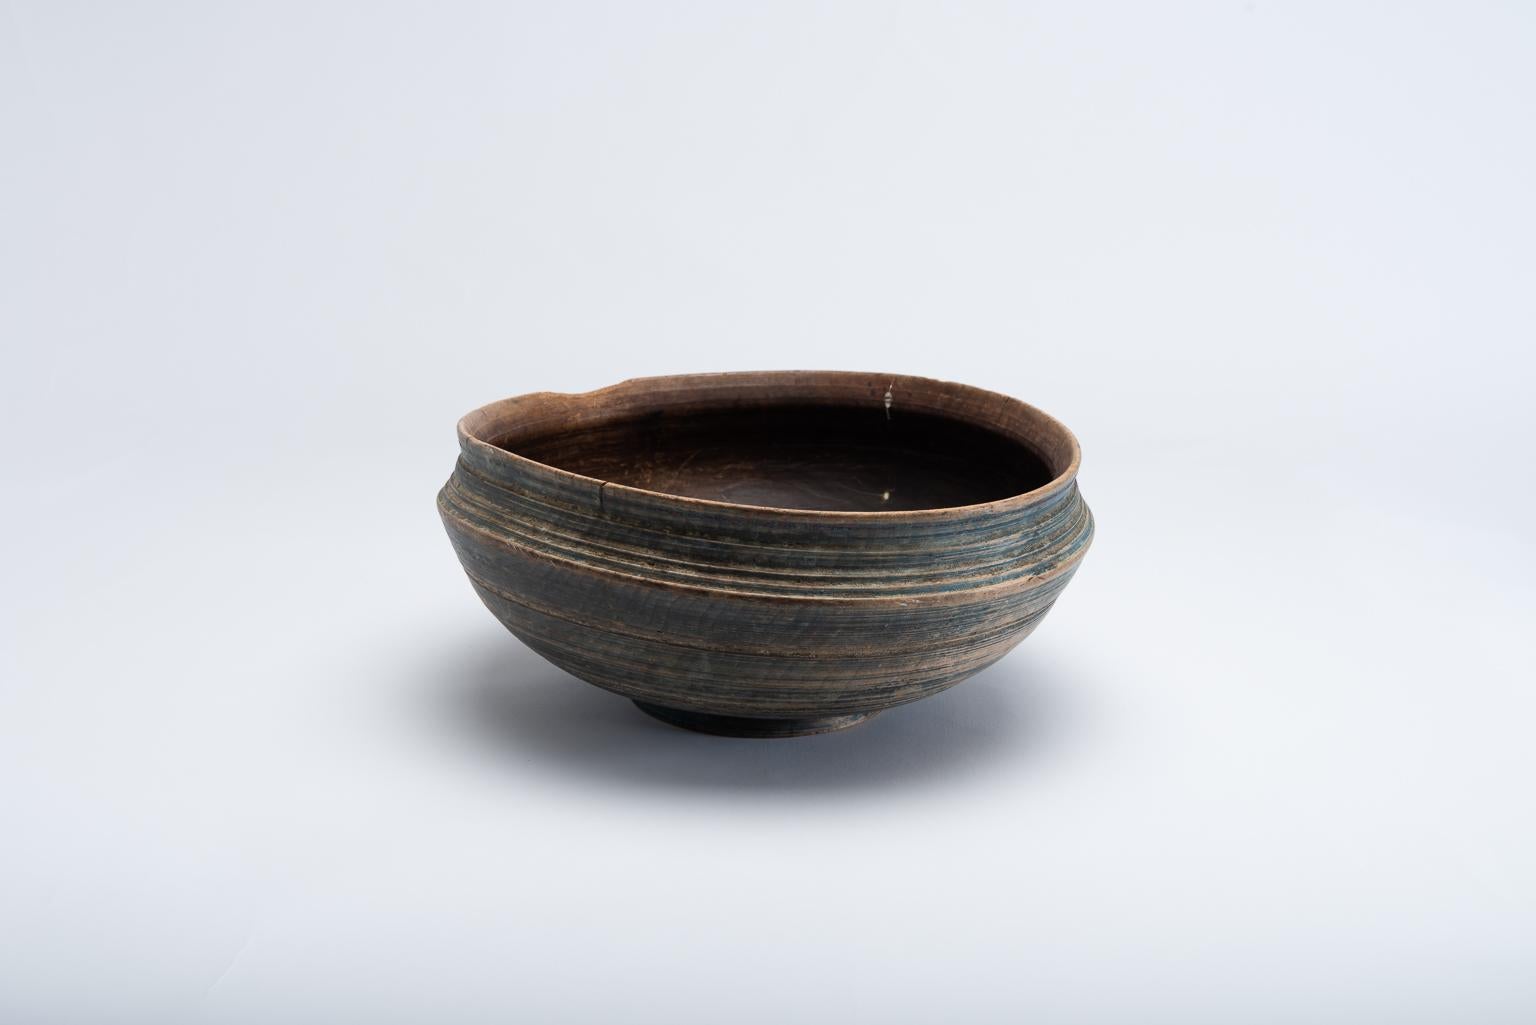 18th Century Unusually Shaped Swedish Wooden Bowl from circa 1800